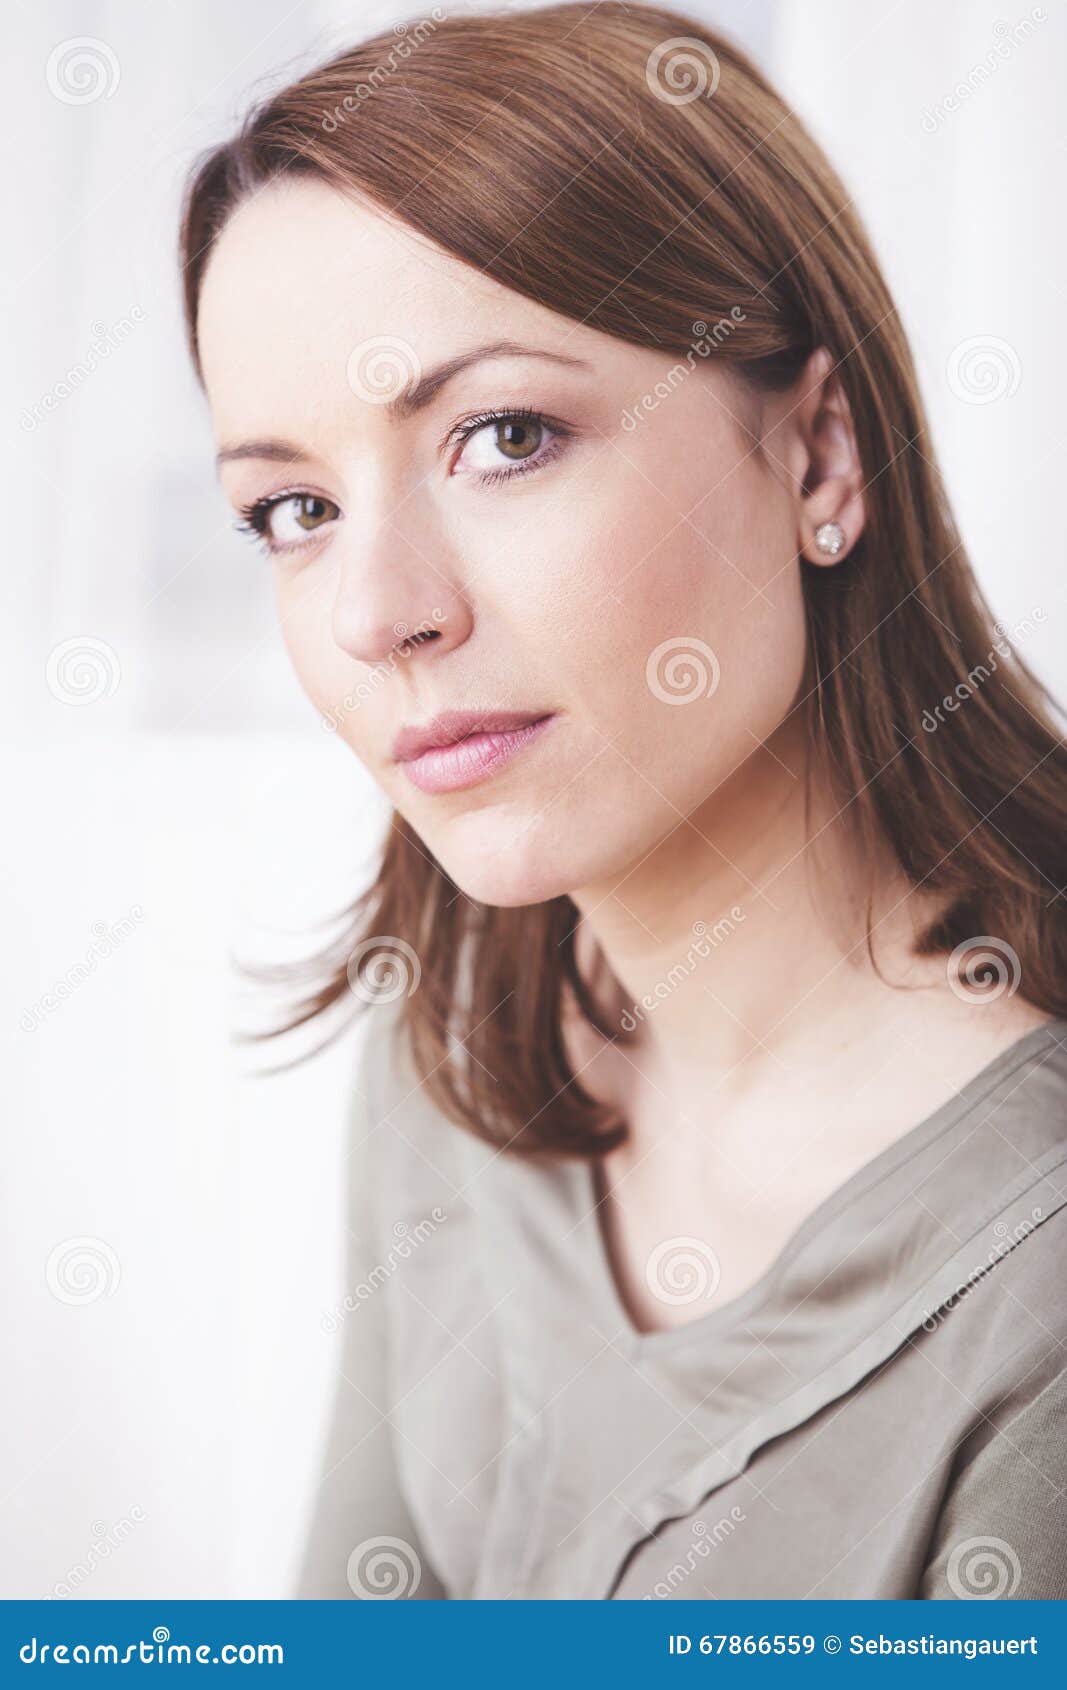 Attractive Brown Haired Casual Dressed Woman Stock Image - Image of ...